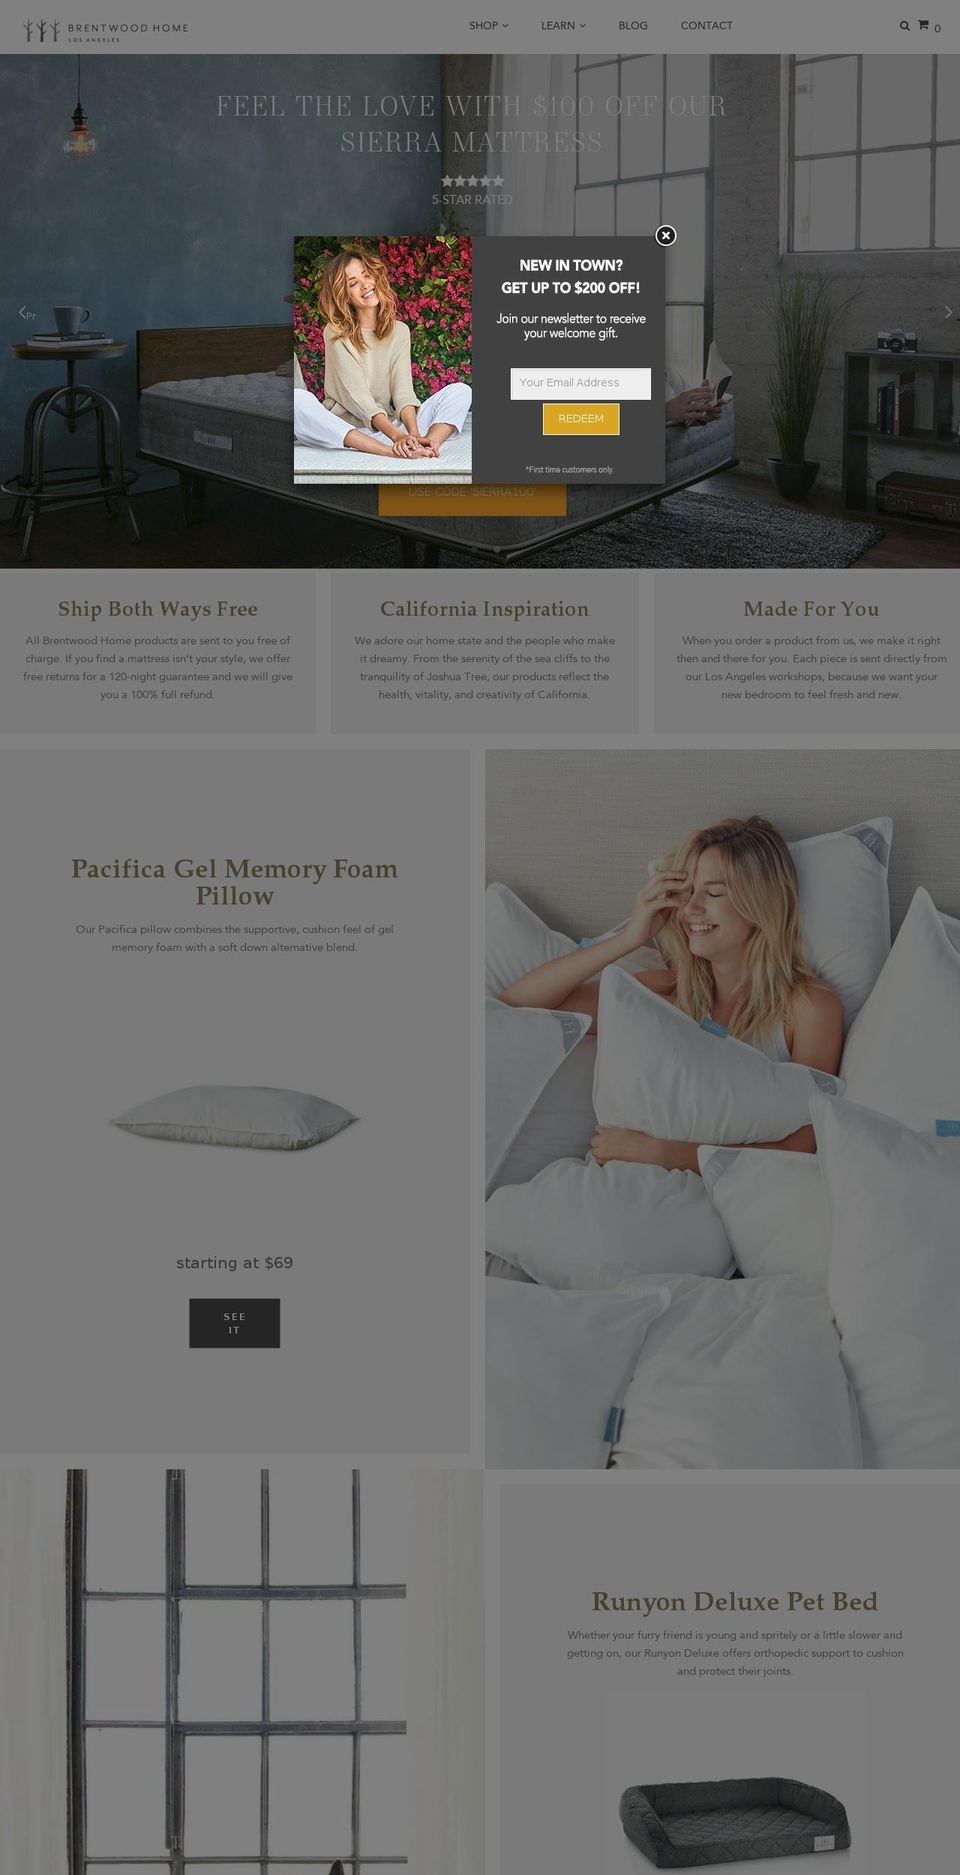 Production Shopify theme site example brentwoodhome.com